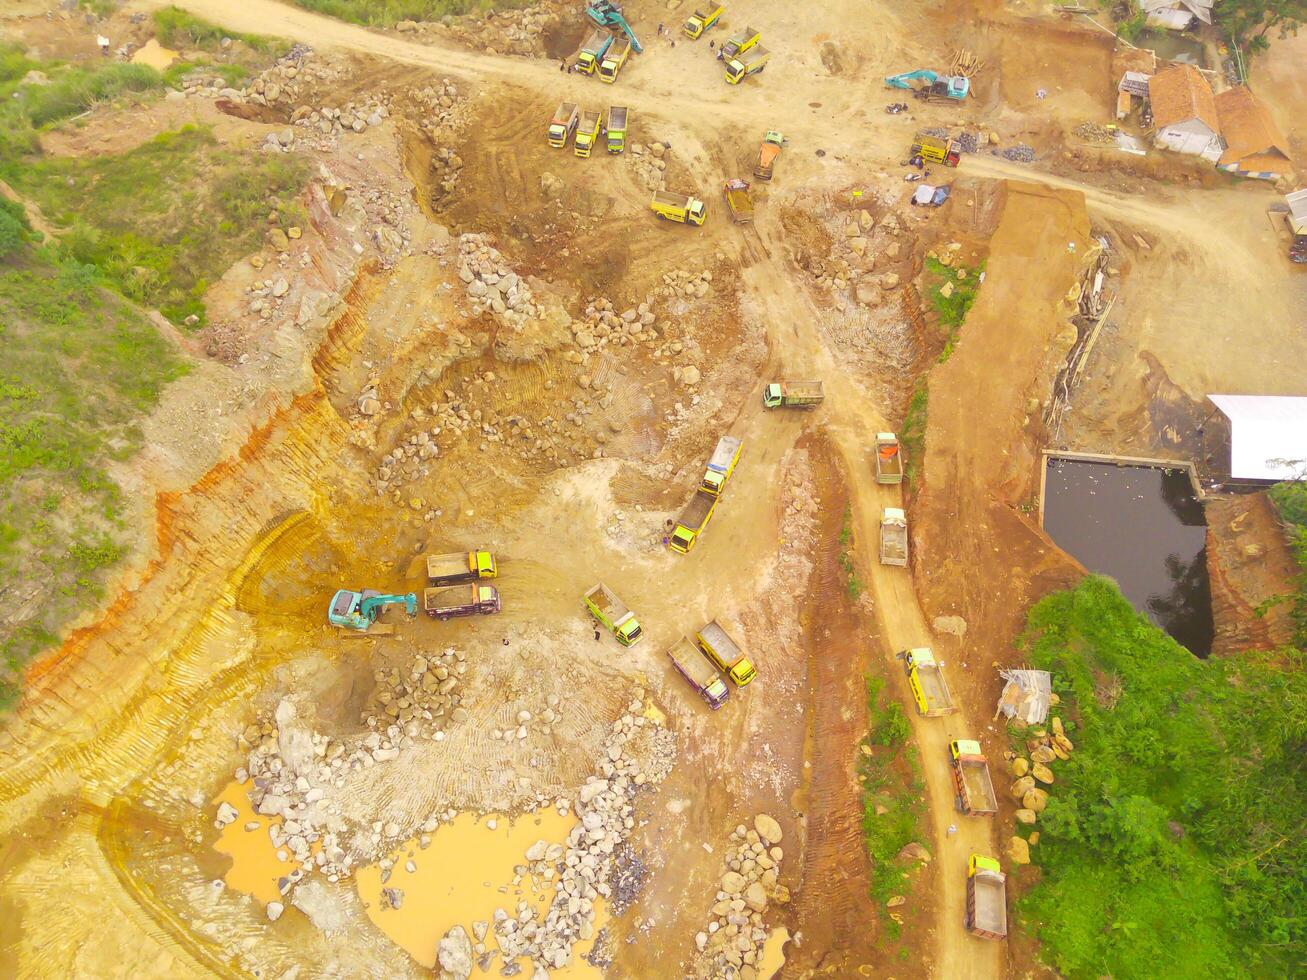 Top View of Truck Queue. Trucks are queuing to transport mining products from the city of Cikancung, Indonesia. Shot from a drone flying 200 meters high photo